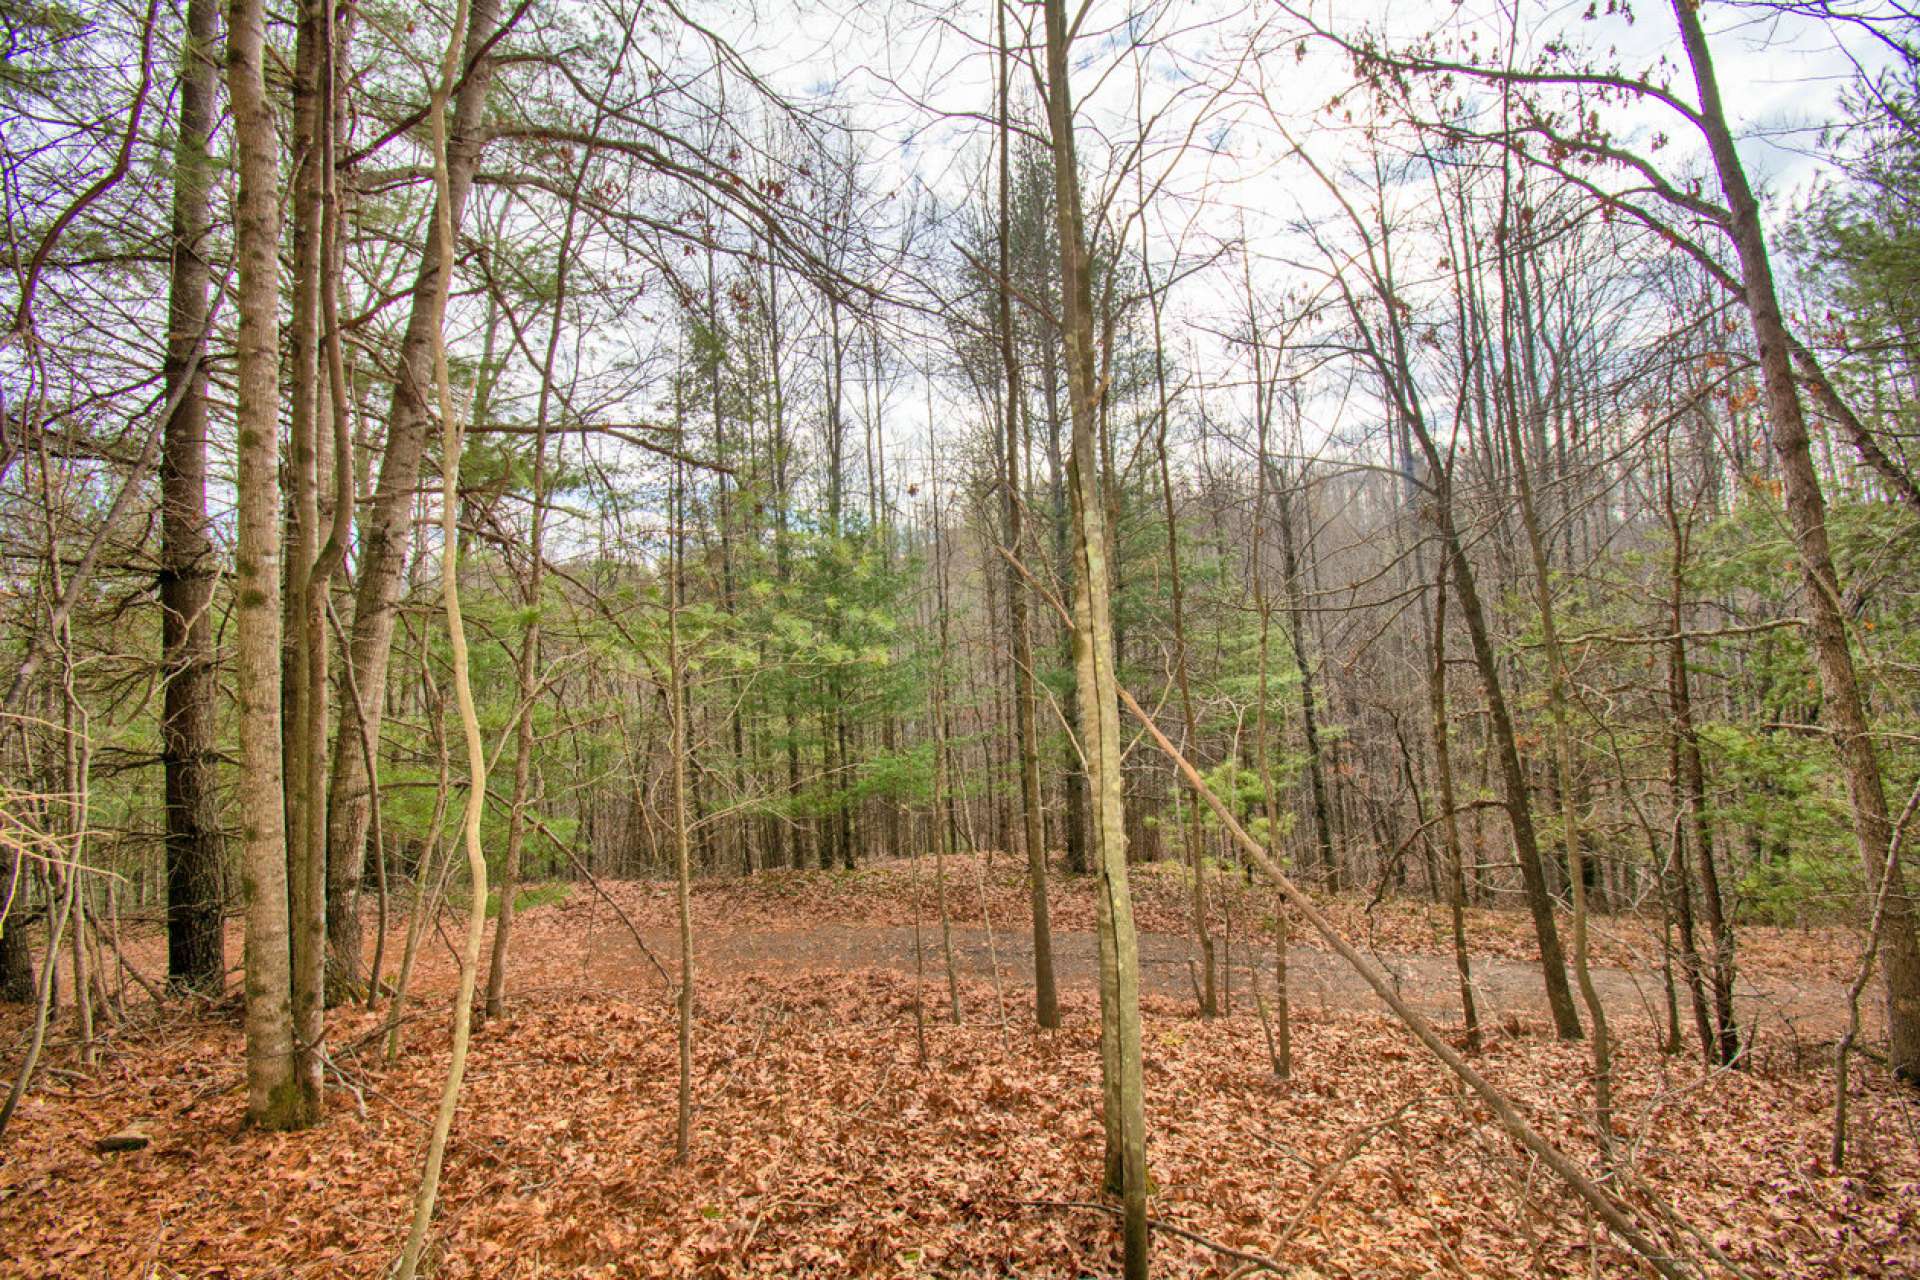 Lot 10  is another 1.26 acre easy-build homesite.